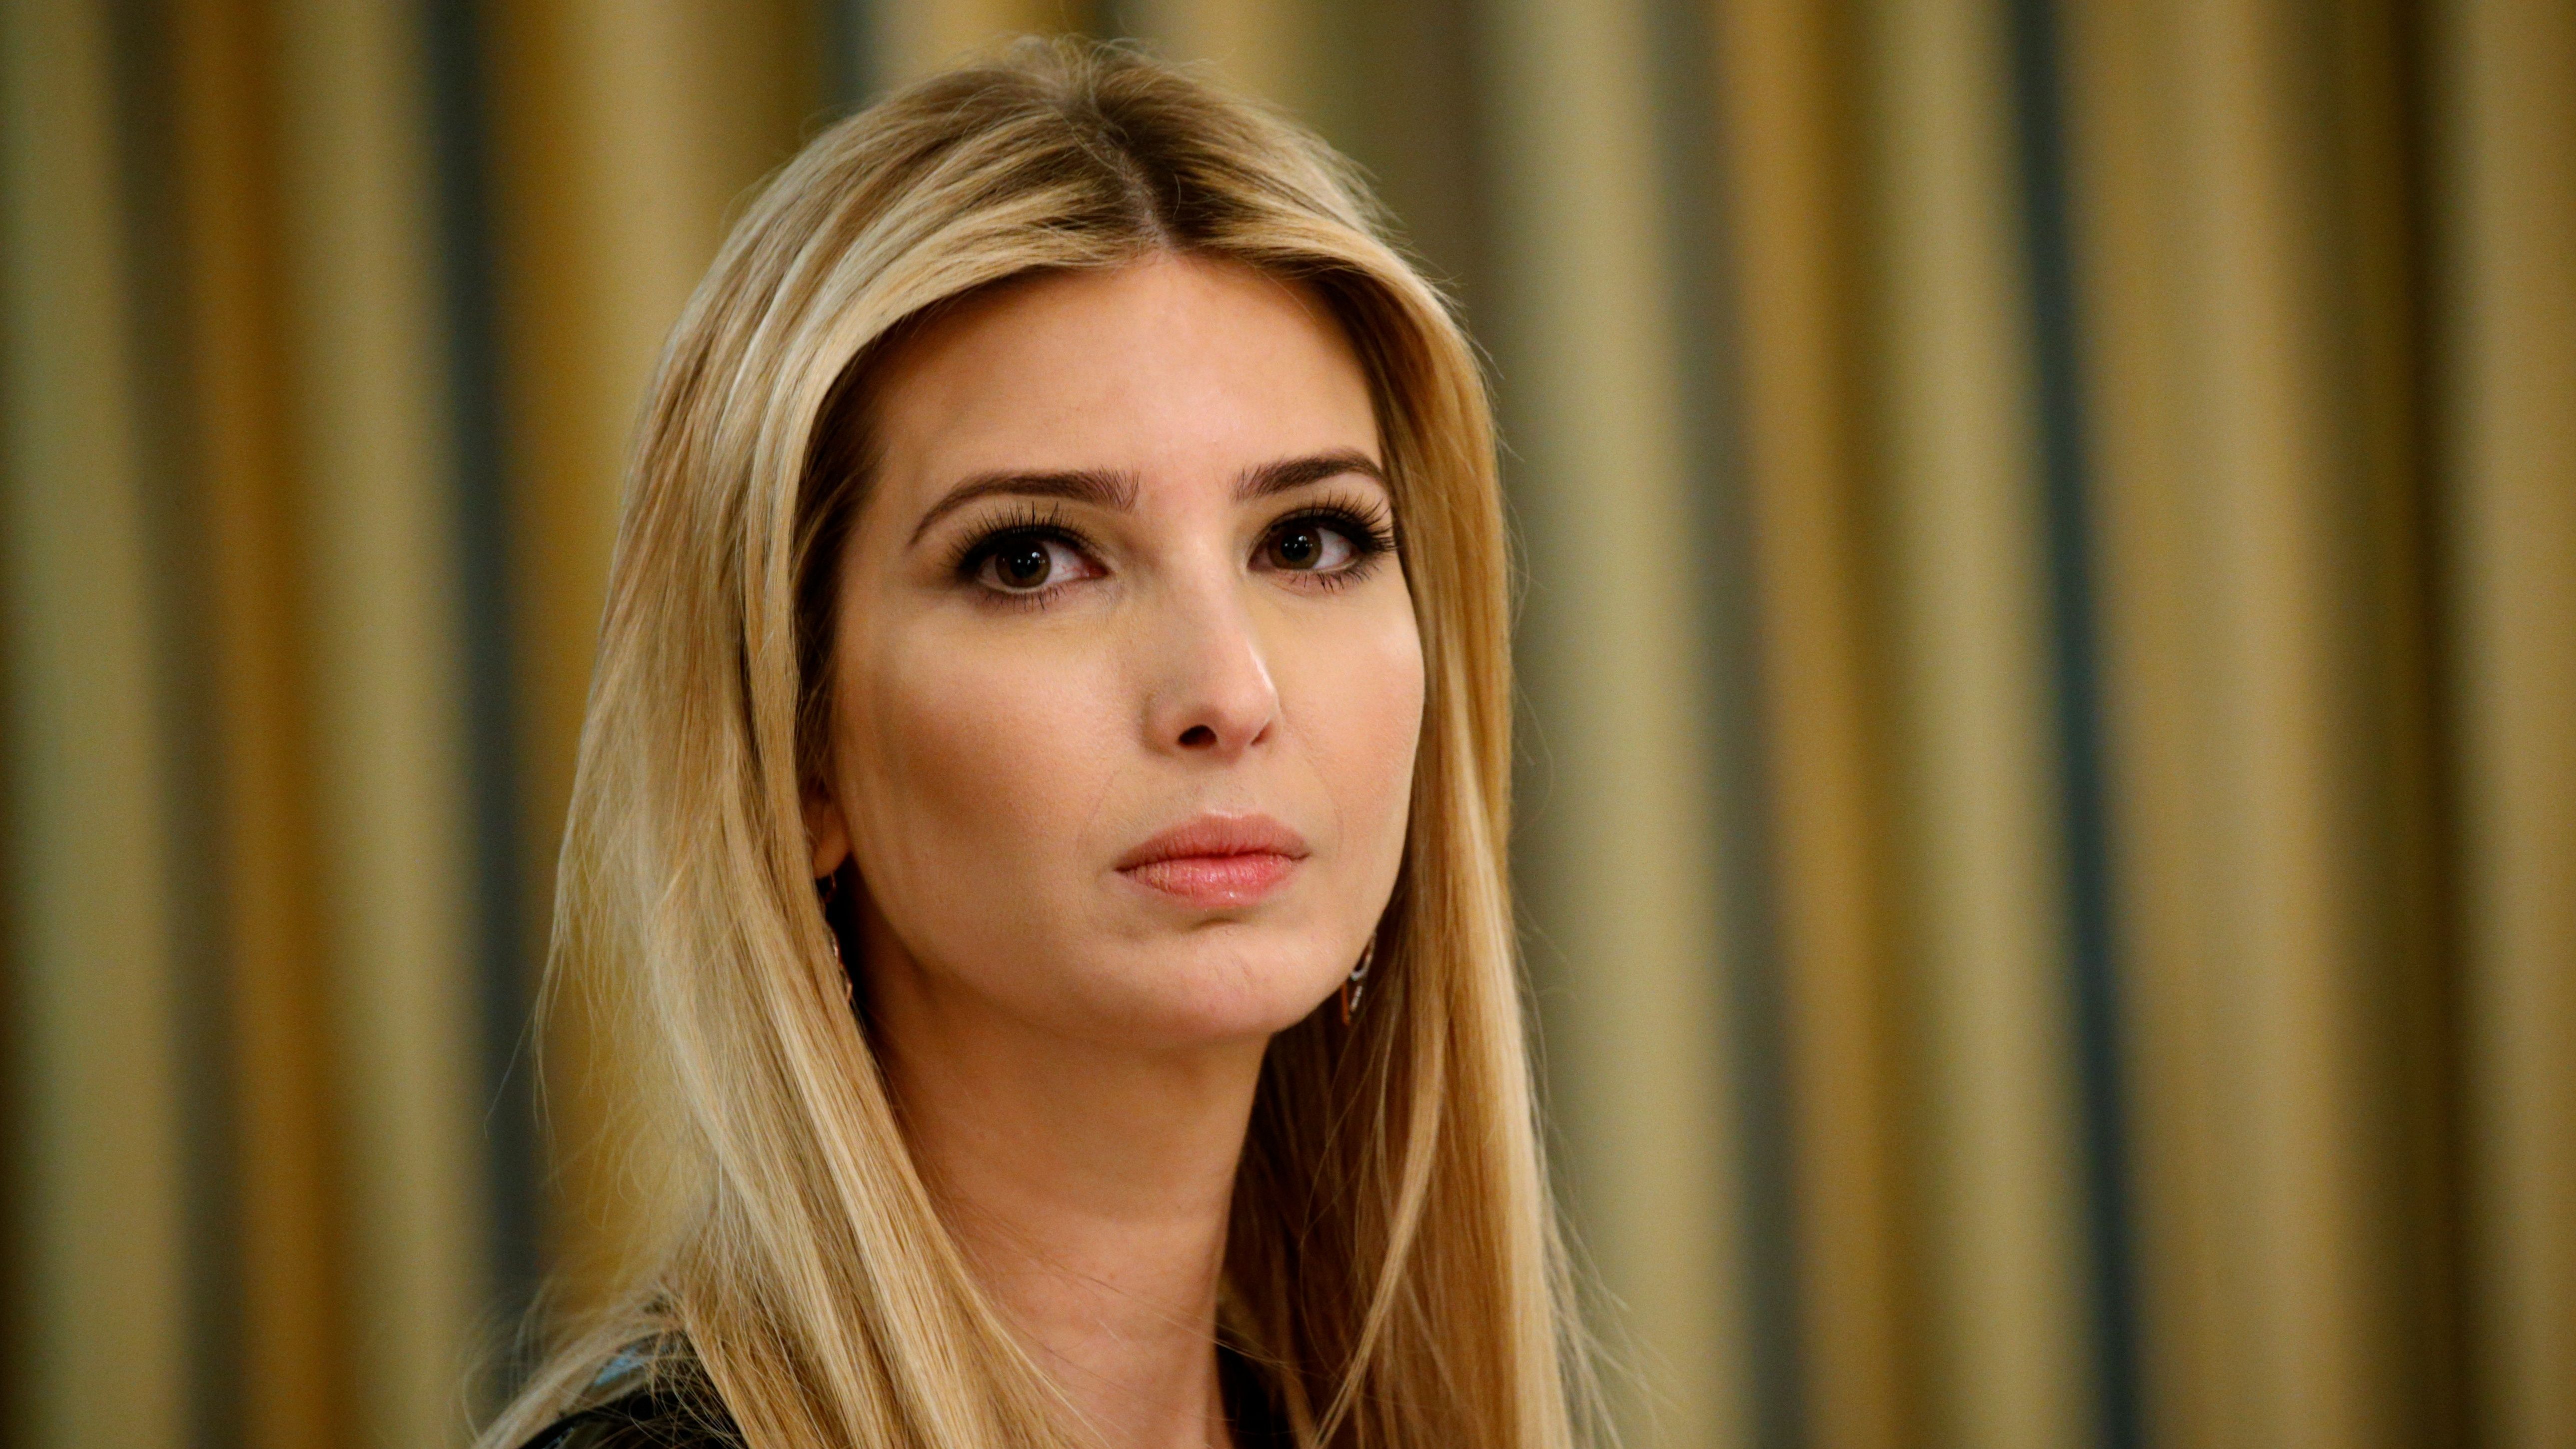 While Americans boycott Ivanka Trump, Chinese firms are naming their